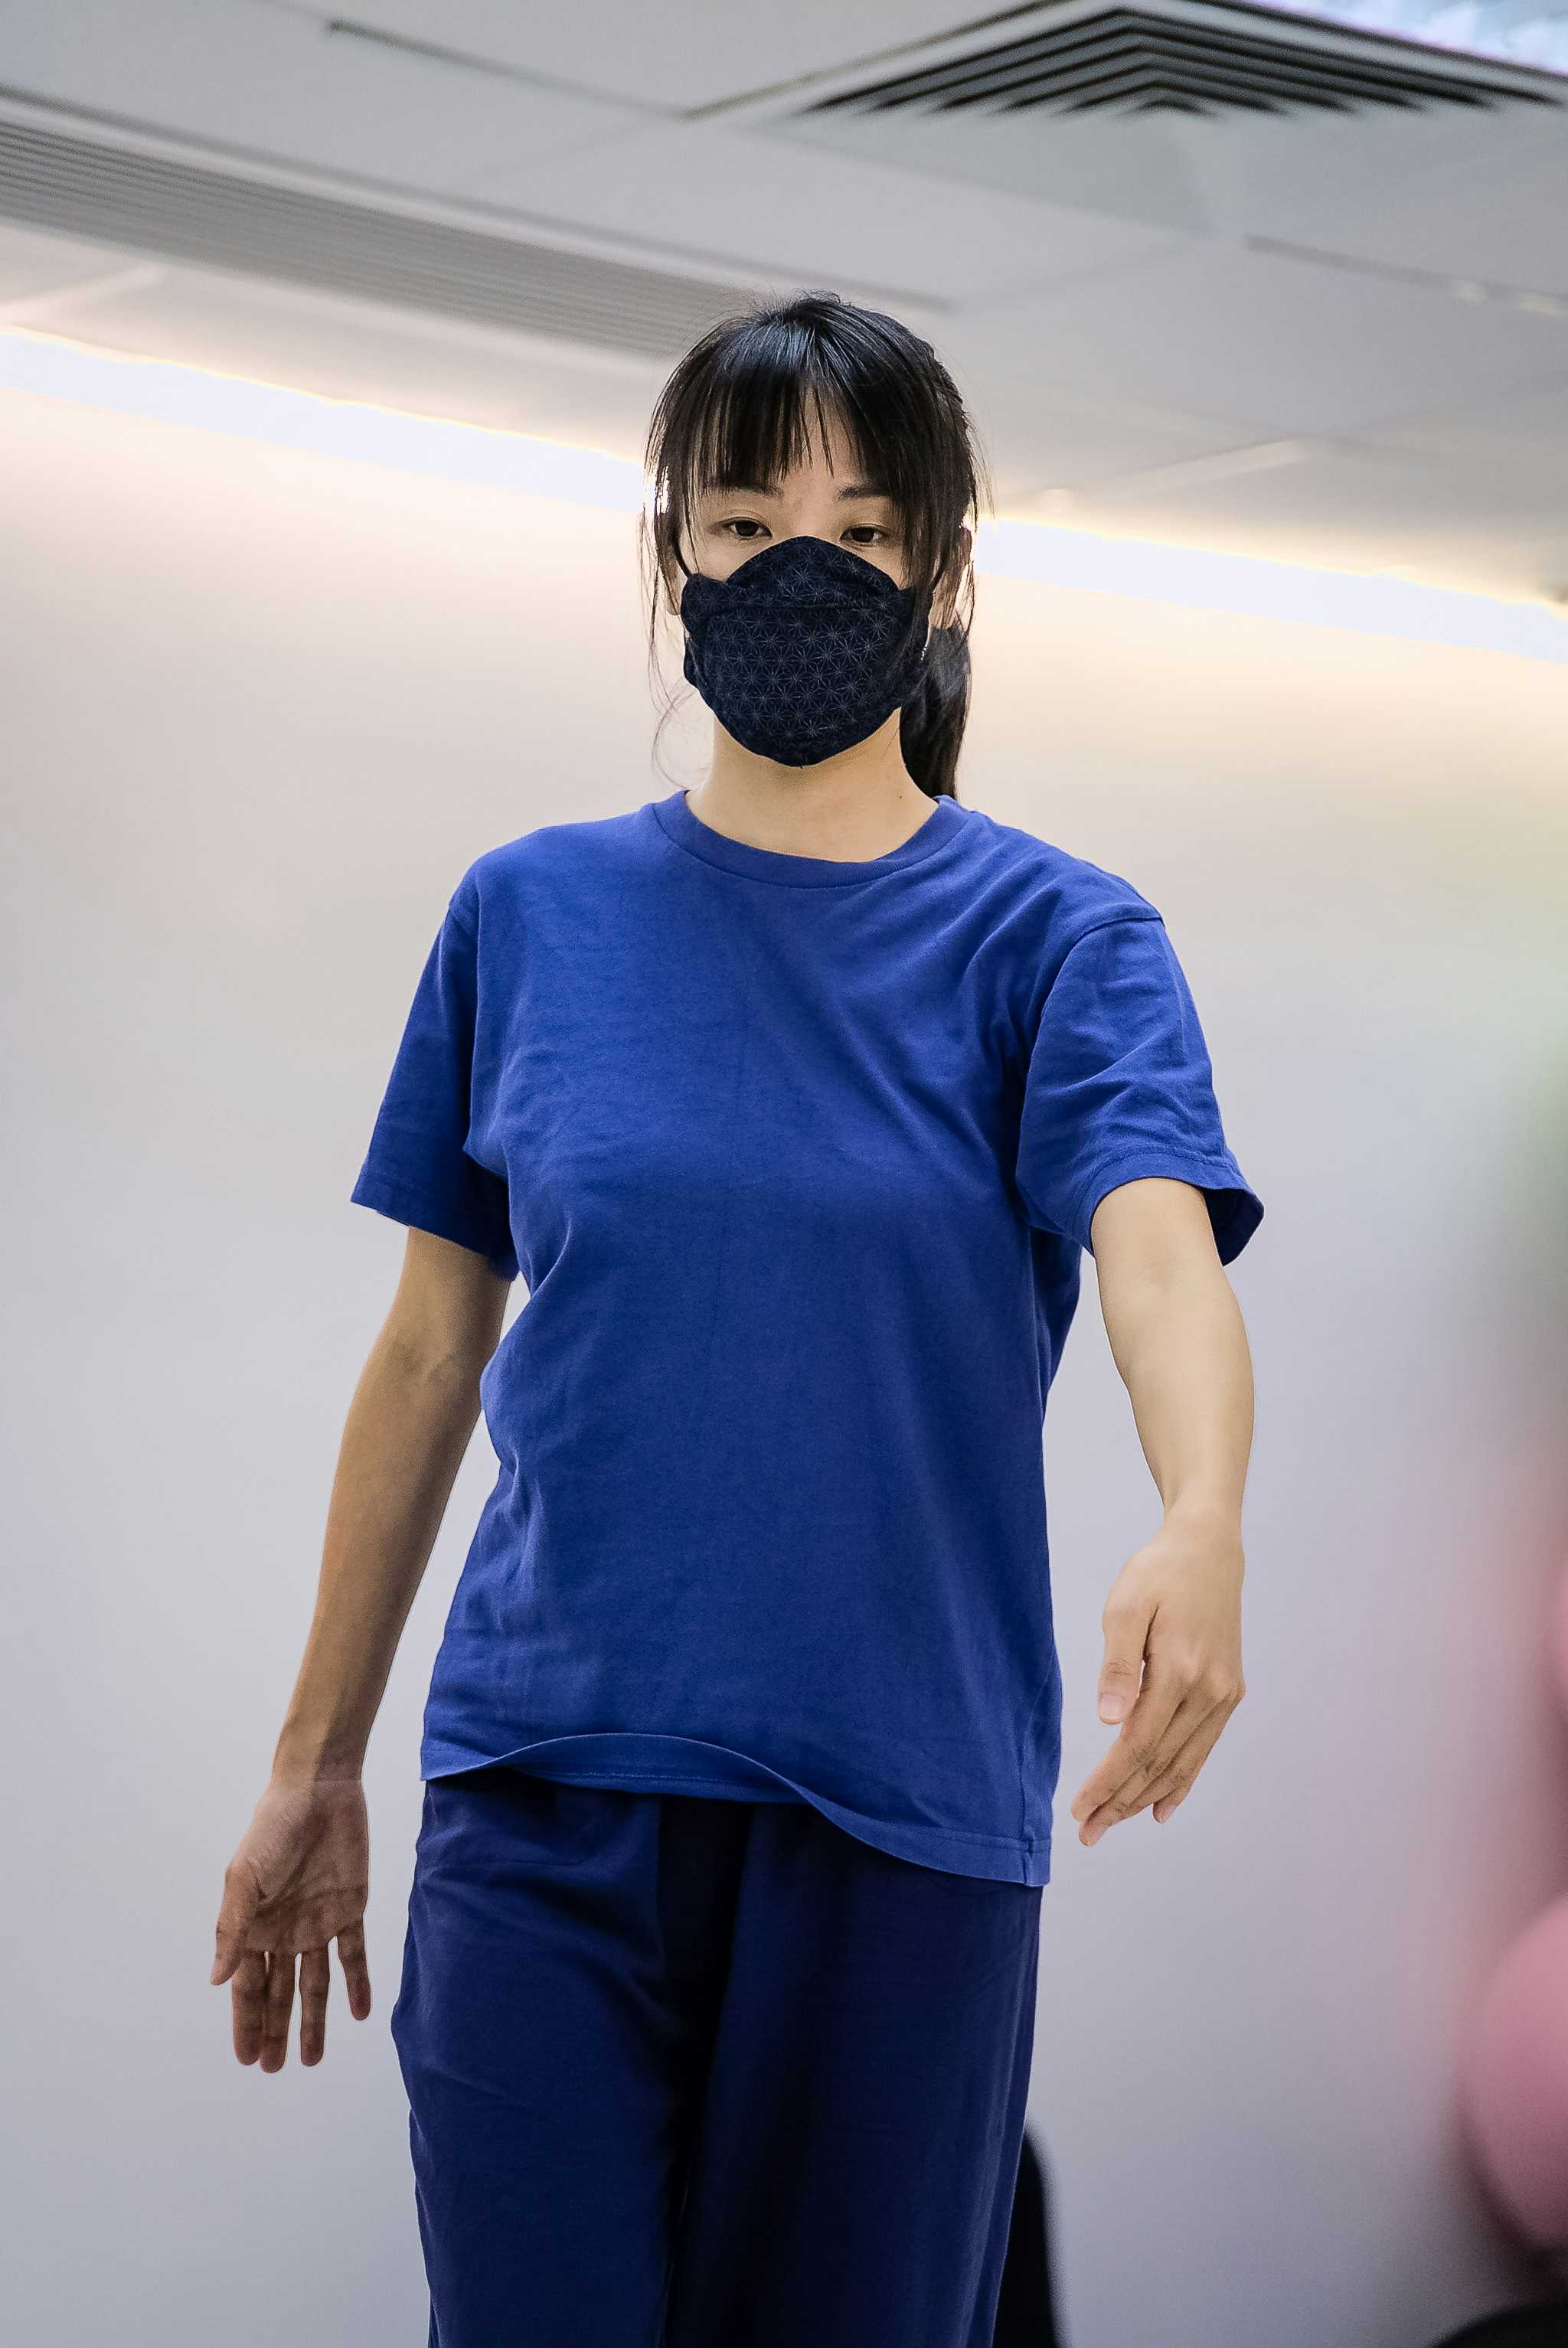 We Still Dance rehearsal photo | Featuring: Ivy Tsui | Tagged as: Rehearsal, We Still Dance | Photo: Rooftop Productions |  (Rooftop Productions • Hong Kong Theatre Company)  | Rooftop Productions • Hong Kong Theatre Company